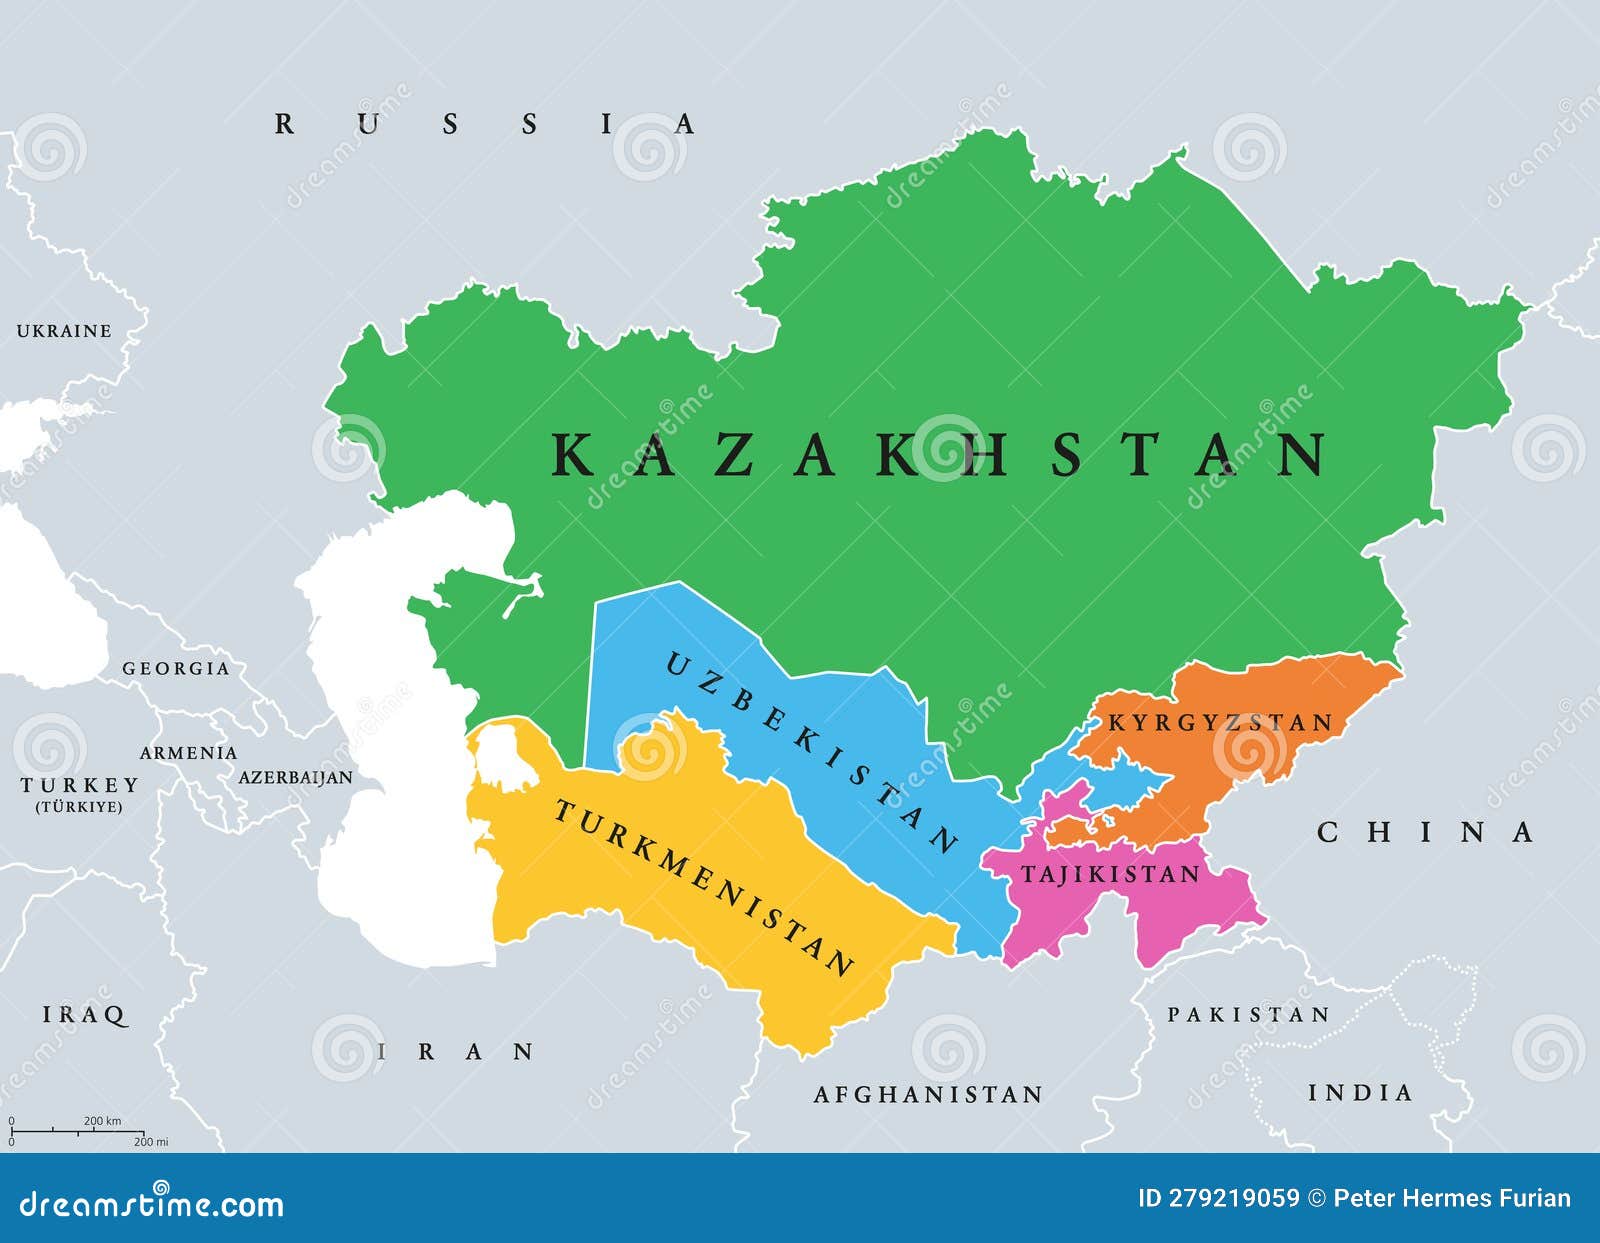 central asia, the middle asia countries, colored political map